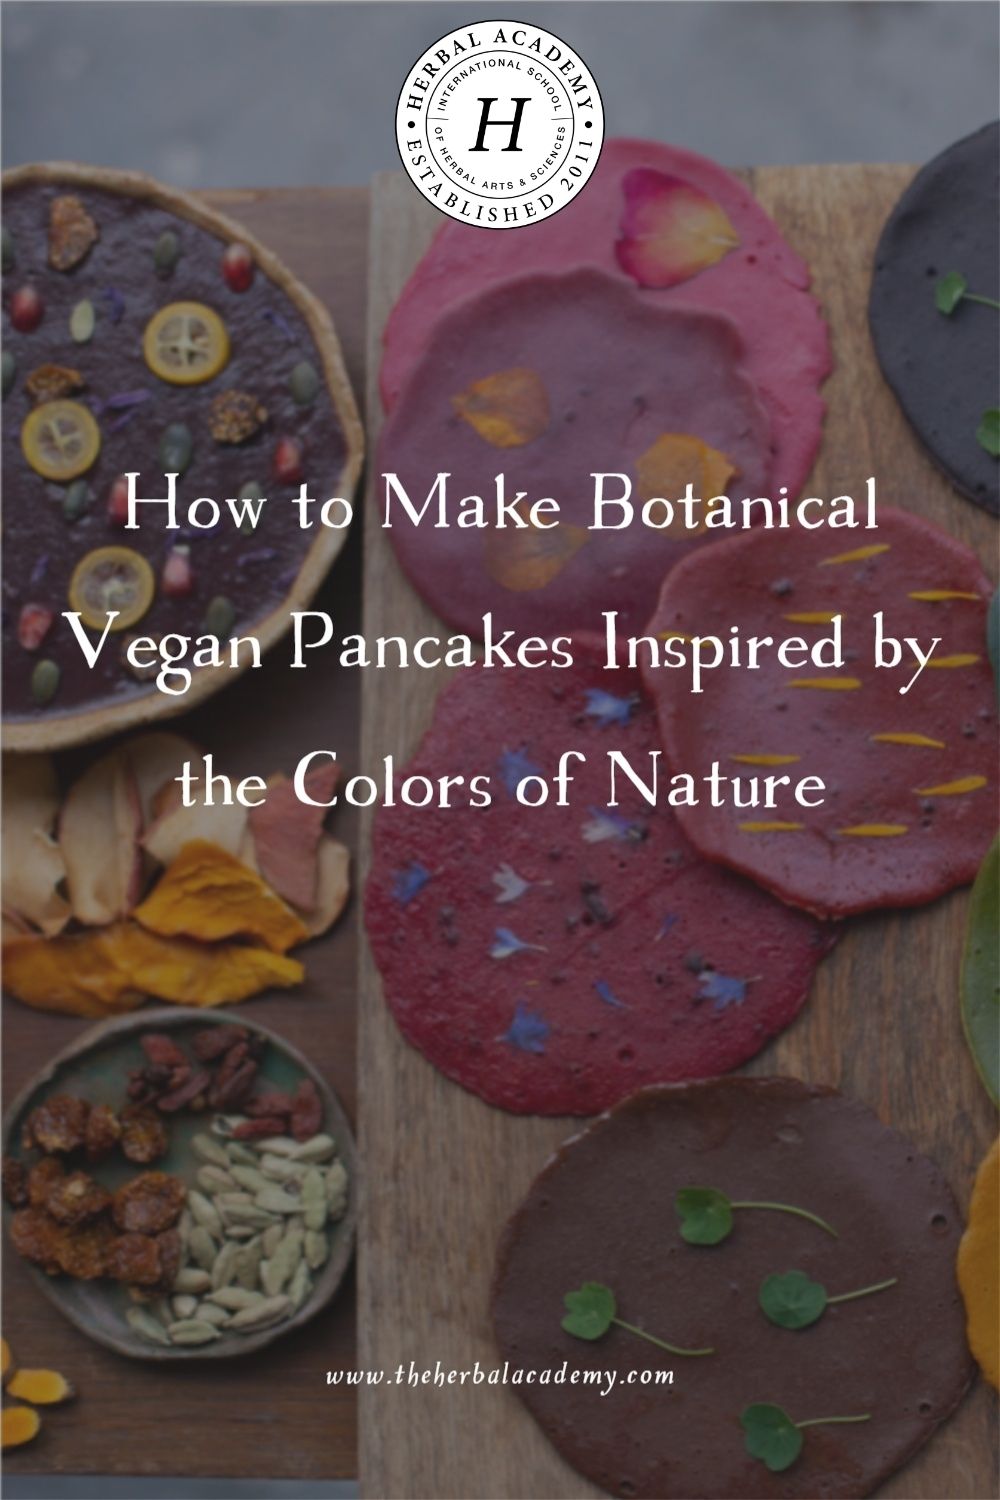 How to Make Botanical Vegan Pancakes Inspired by the Colors of Nature | Herbal Academy | These vegan pancakes are made with colors of nature to achieve vibrant colors without compromising on health.